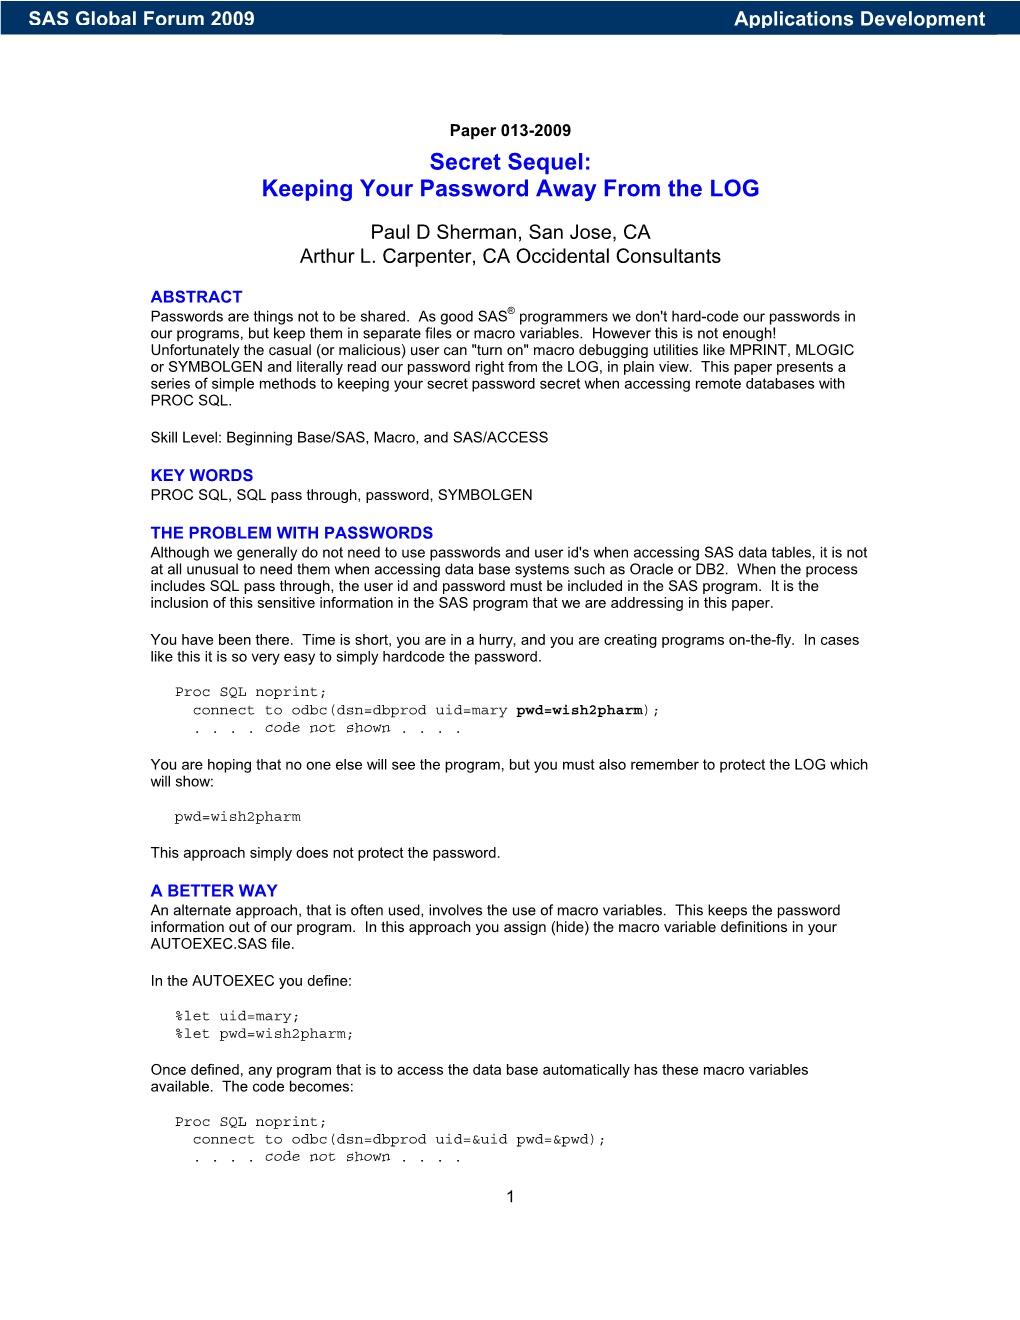 013-2009: Secret Sequel: Keeping Your Password Away from The